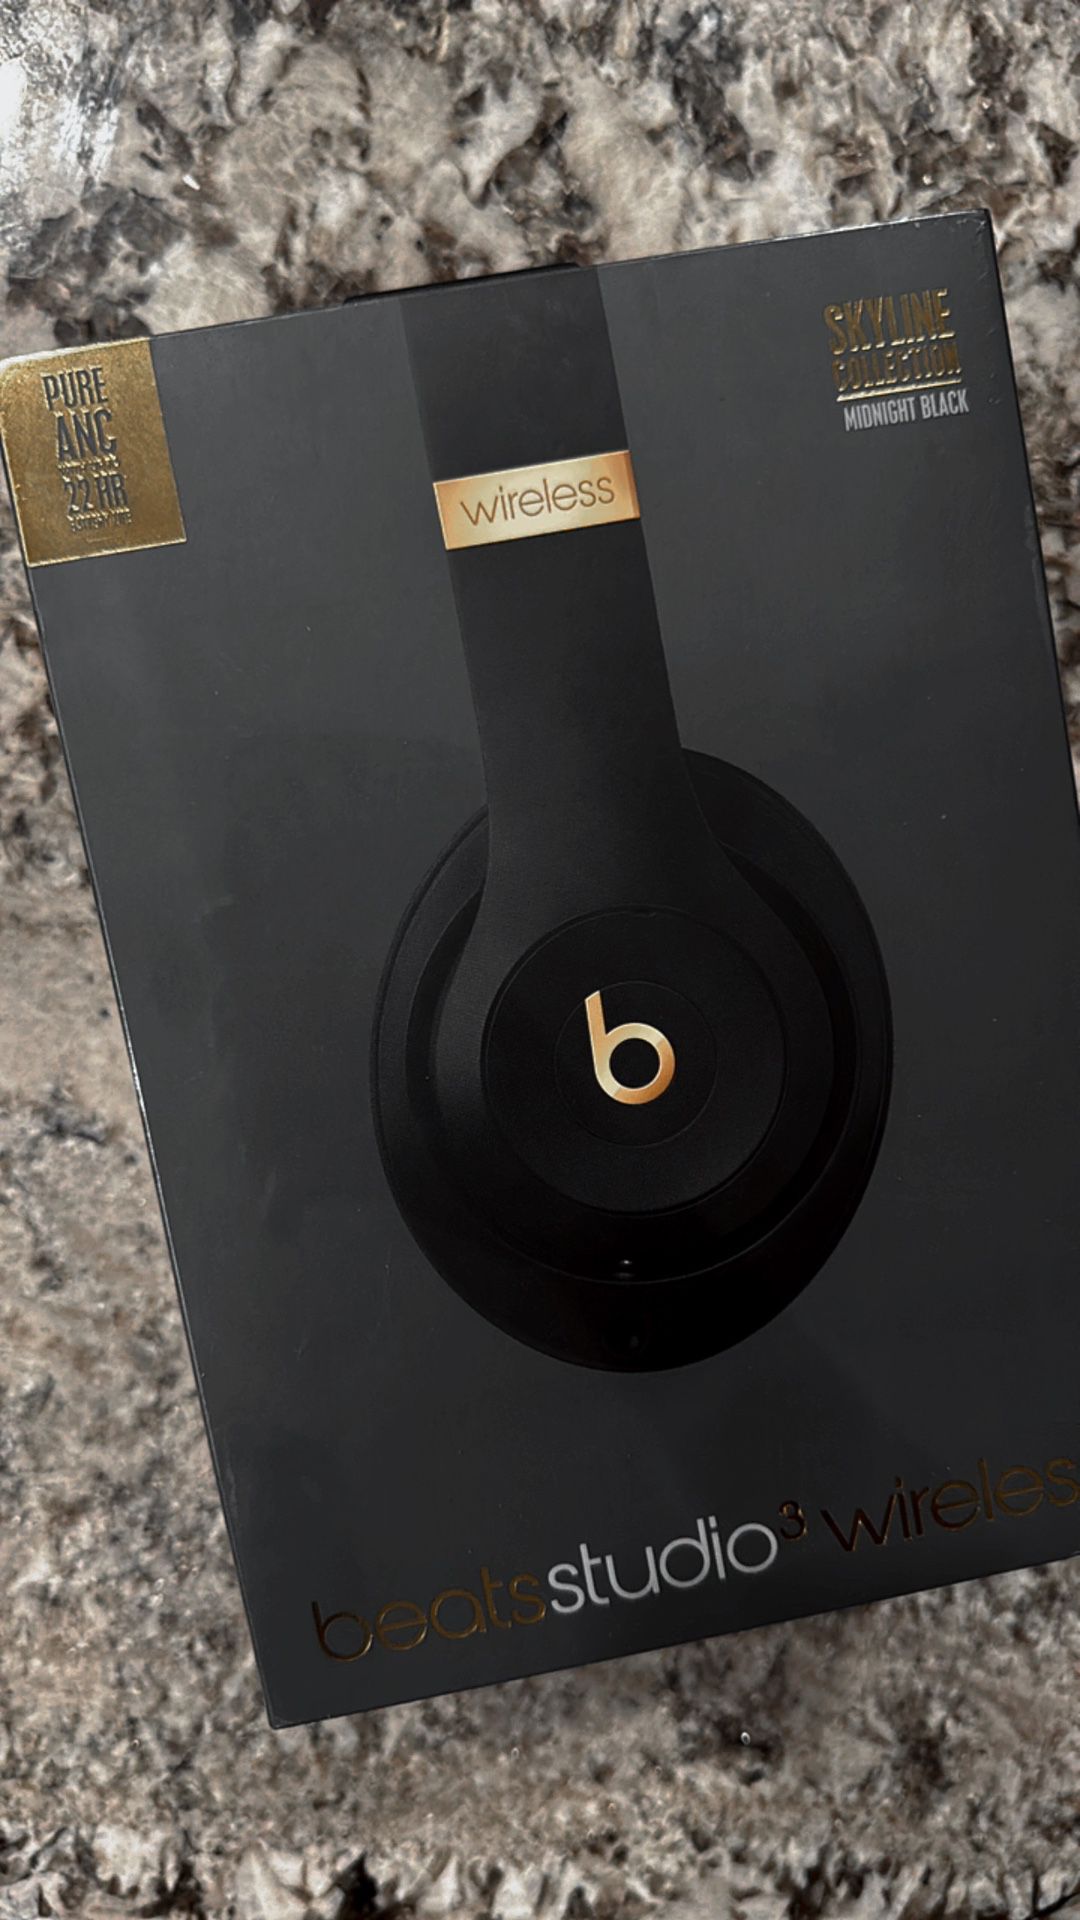 Beats Studio 3 WIRELESS by Dr. Dre (Special Edition)